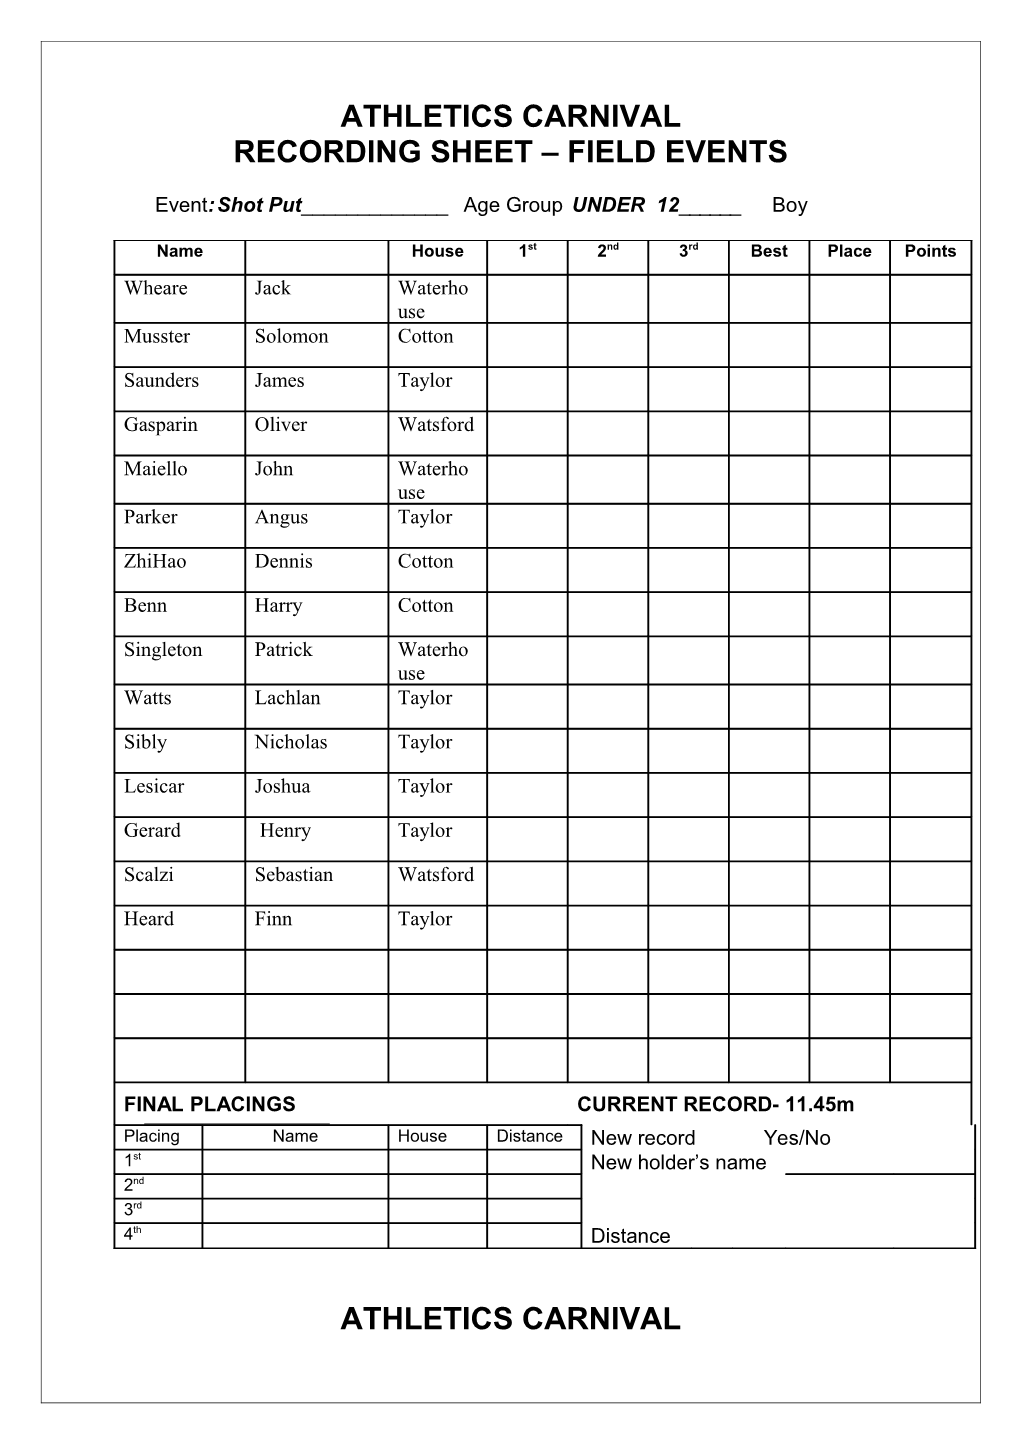 Recording Sheet Field Events